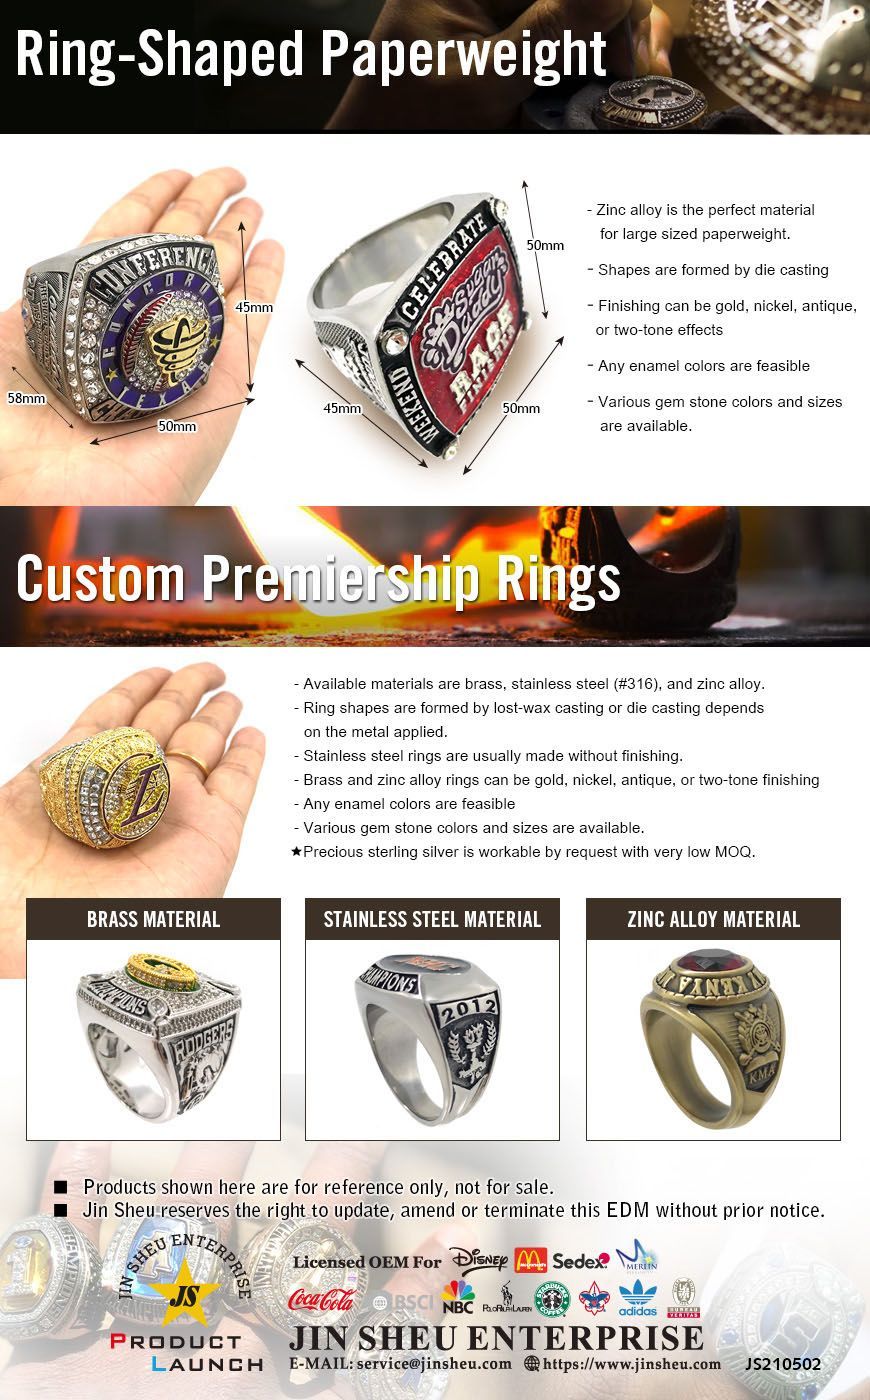 Customized Sports Ring Paperweights for Your Favorite Team. They can be personalized in brass, stainless steel, zinc alloy or even in sterling silver. Jin Sheu's team of experts is here to help you with the perfect design.